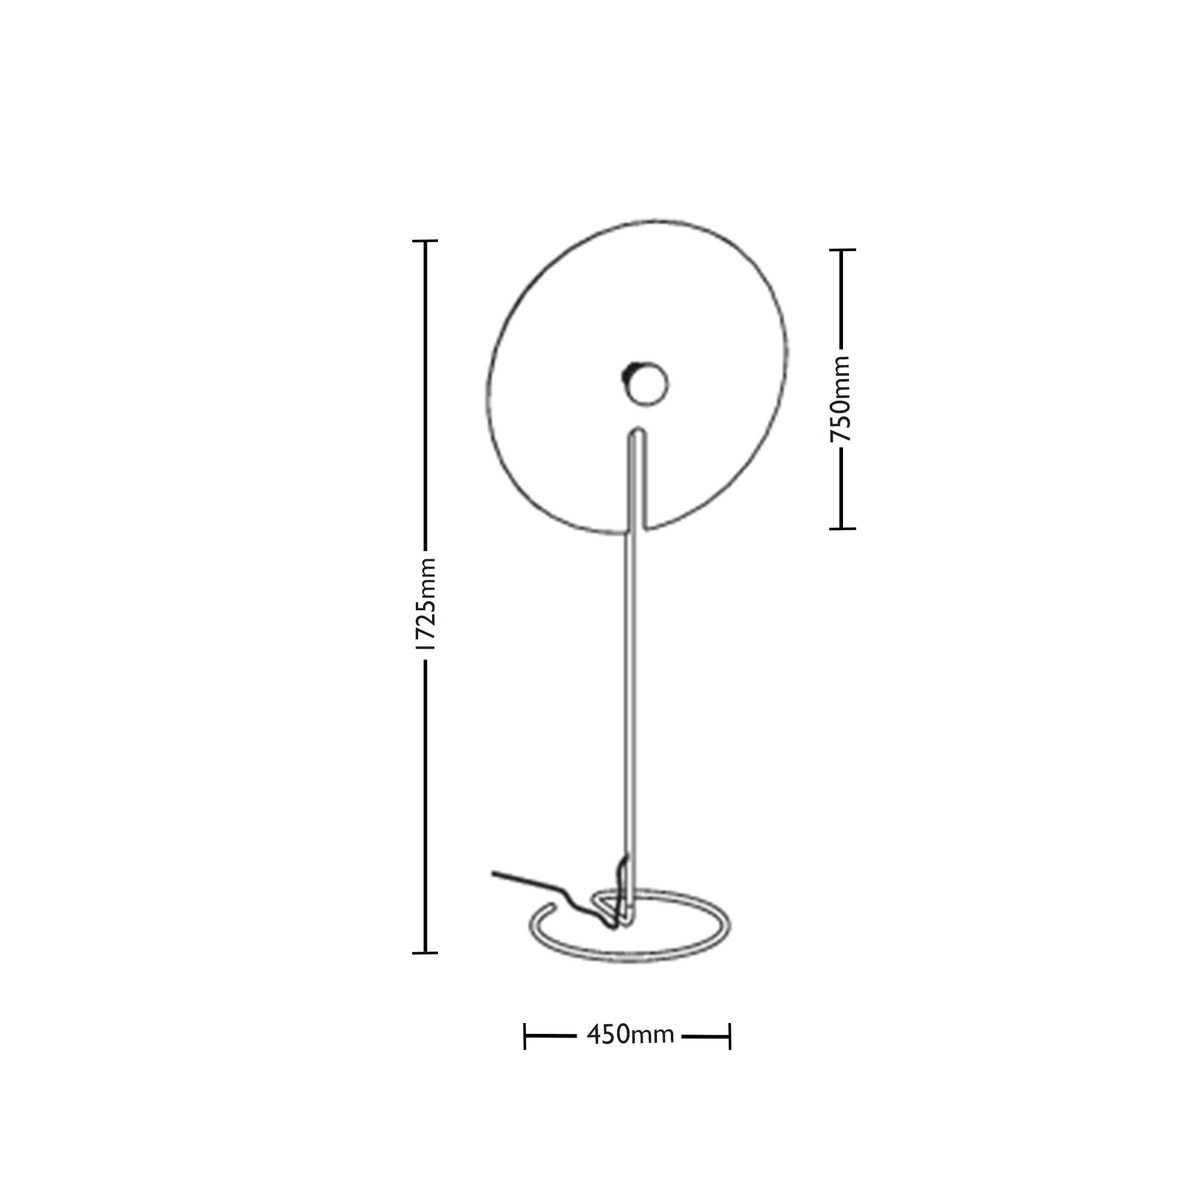 Dimensions for Wever&Ducre Office Mirro Floor Lamp 3.0